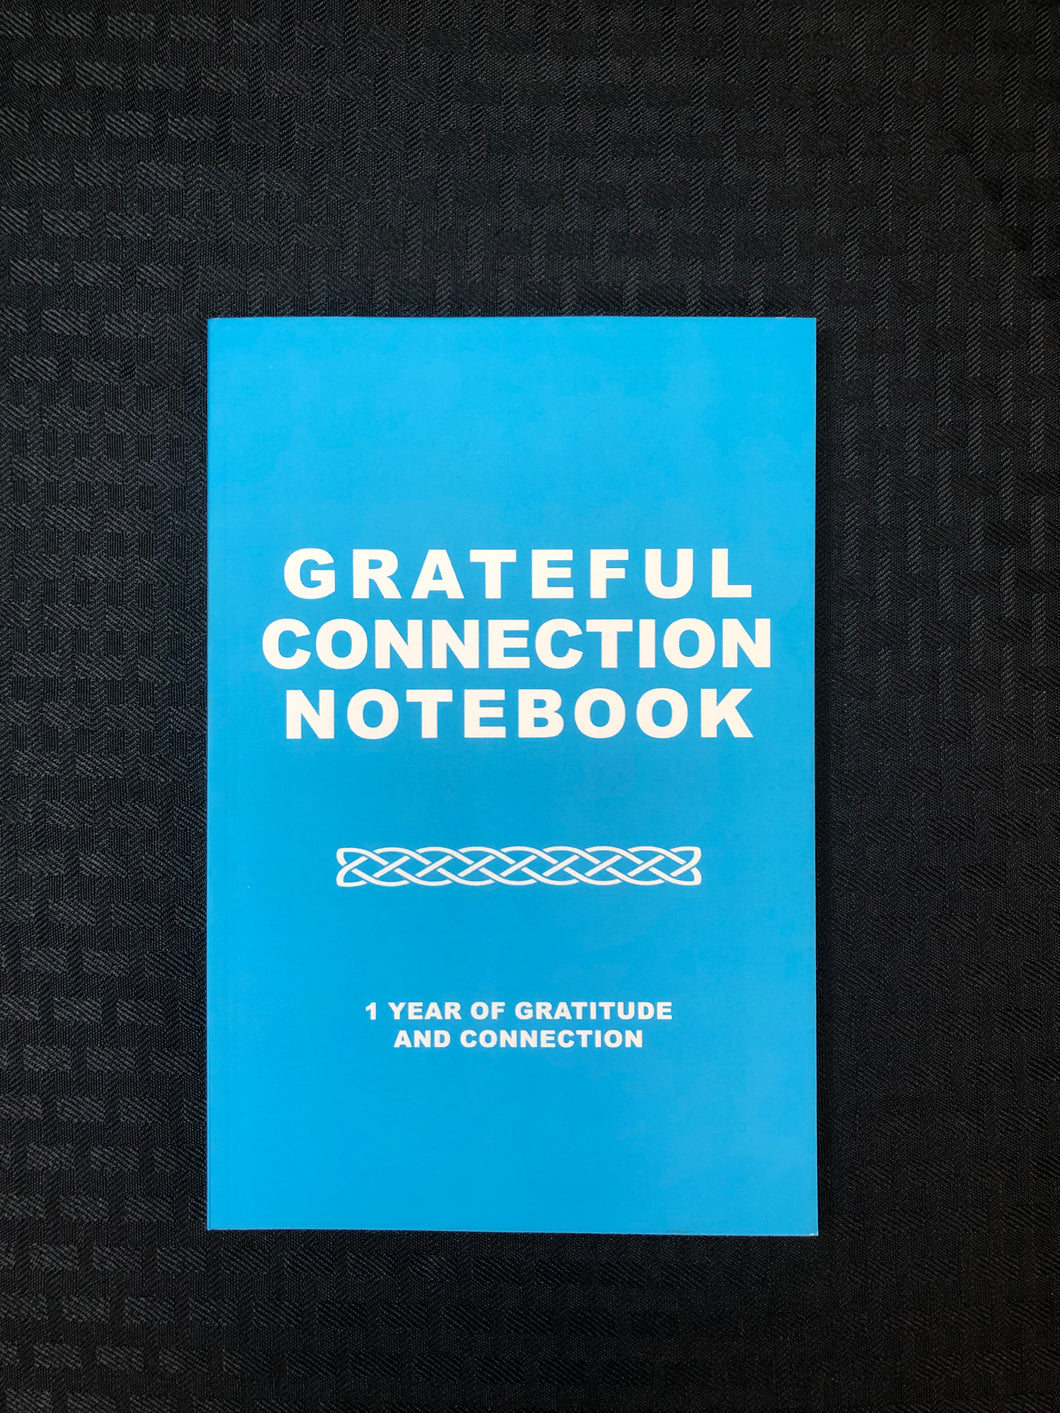 Grateful Connection Notebook - 1 Year of Gratitude and Connection